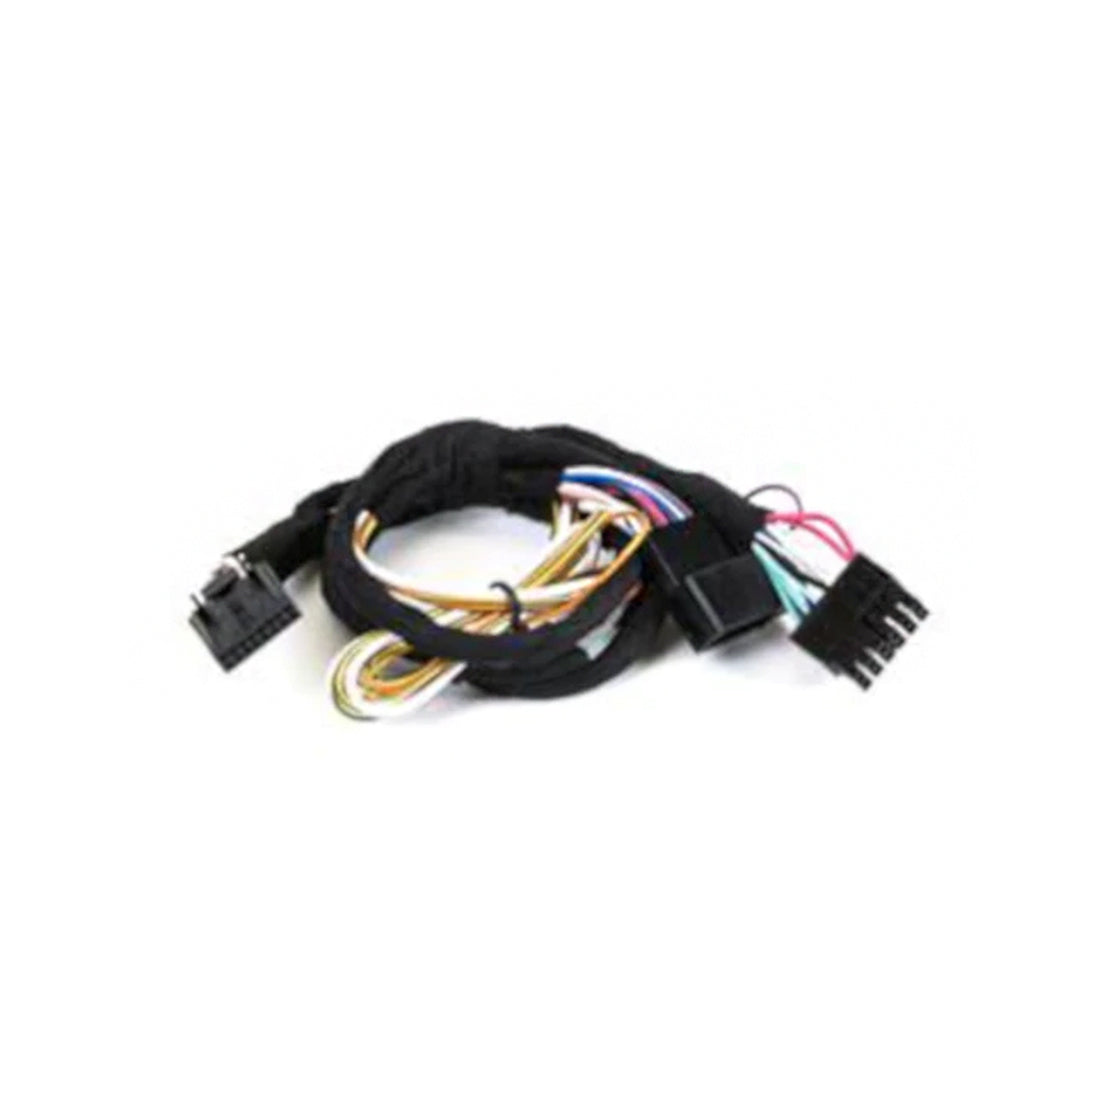 Viper THFON1 DS4/DS4+ Integration T-Harness For Ford and Lincoln Key Type Vehicles